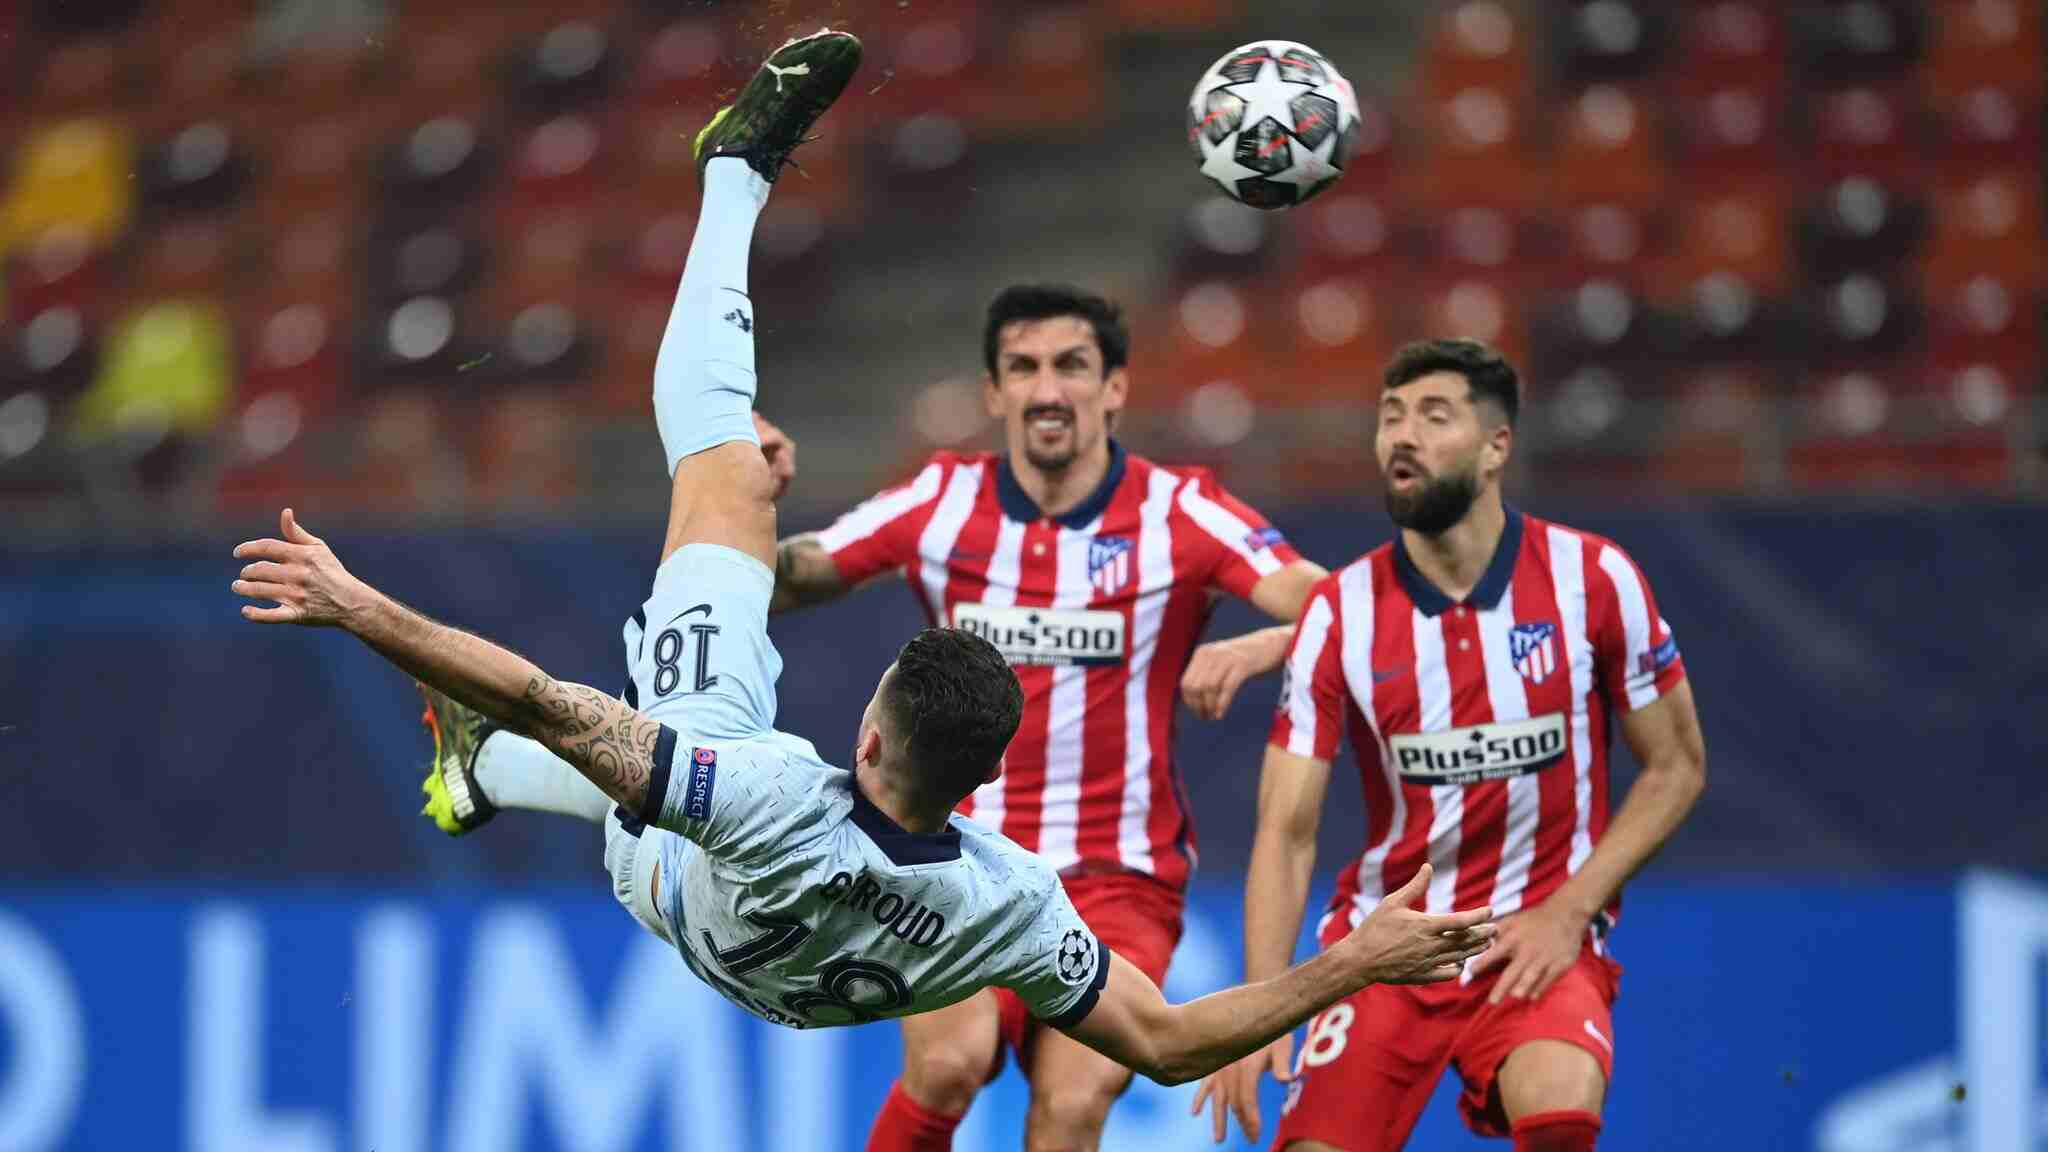 Real Sociedad vs Atletico Madrid LIVE in La Liga: RS vs ATL Live Streaming Details In India and Other Countries